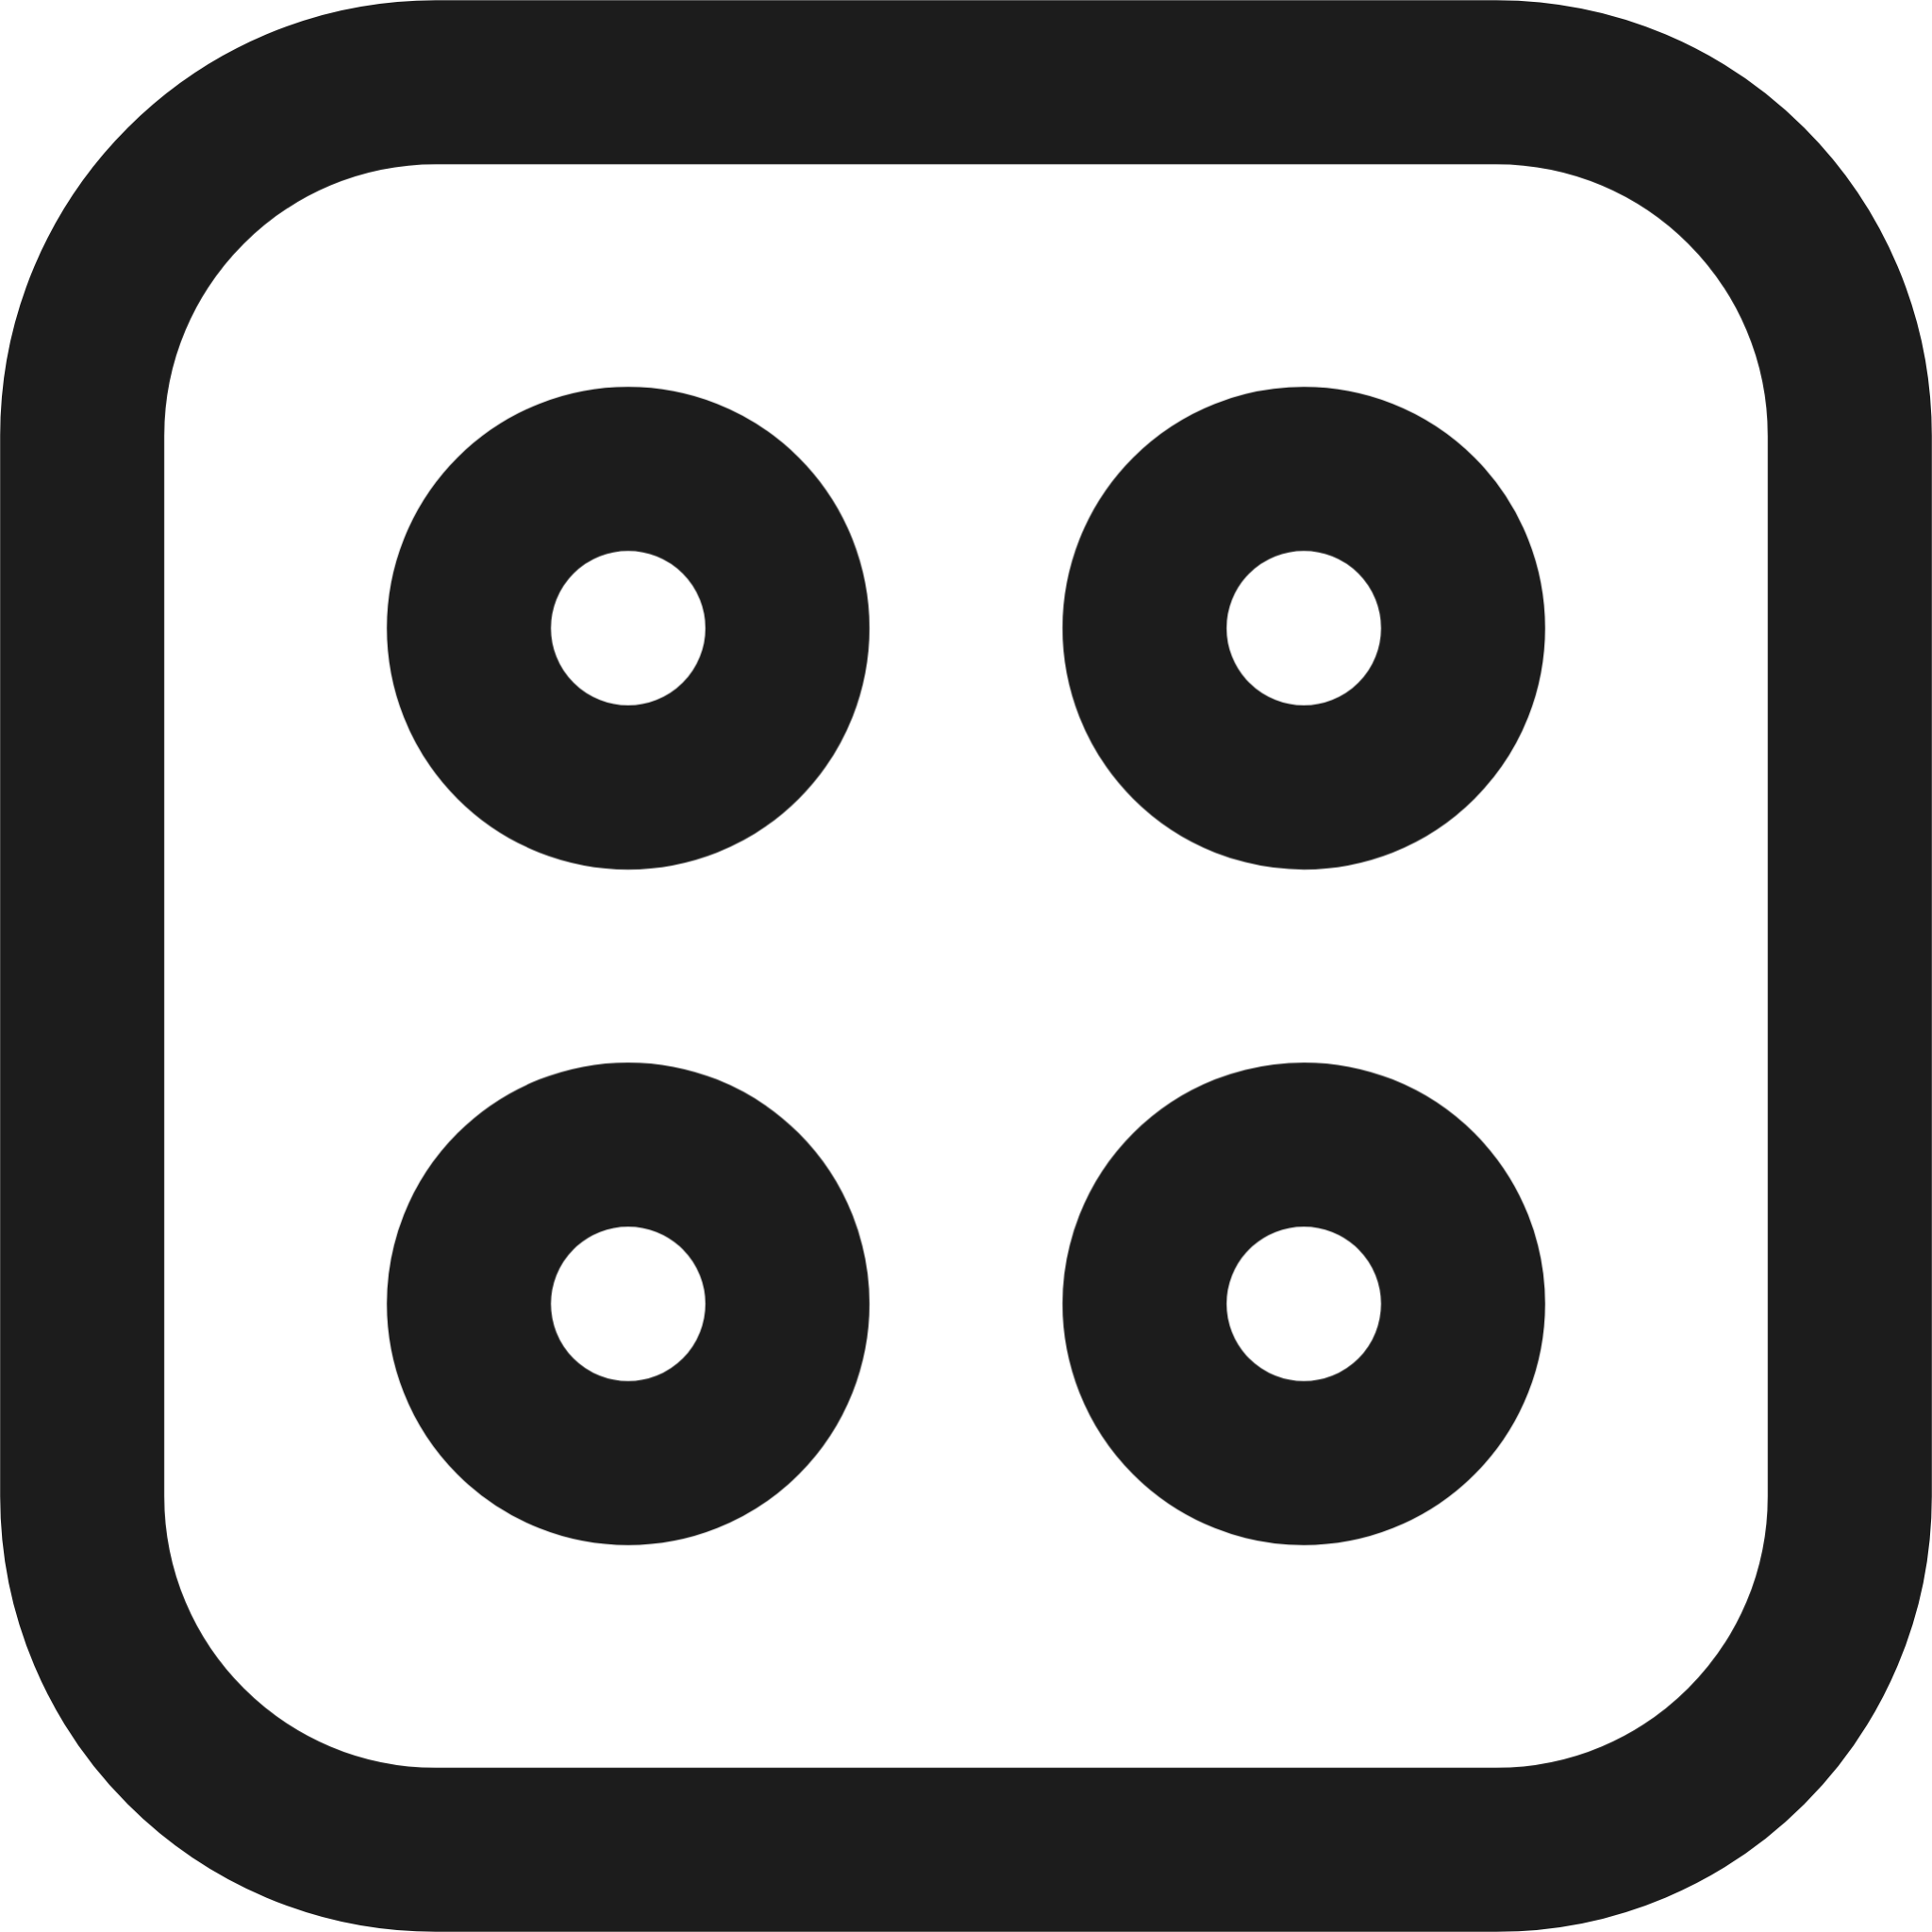 oven tray icon